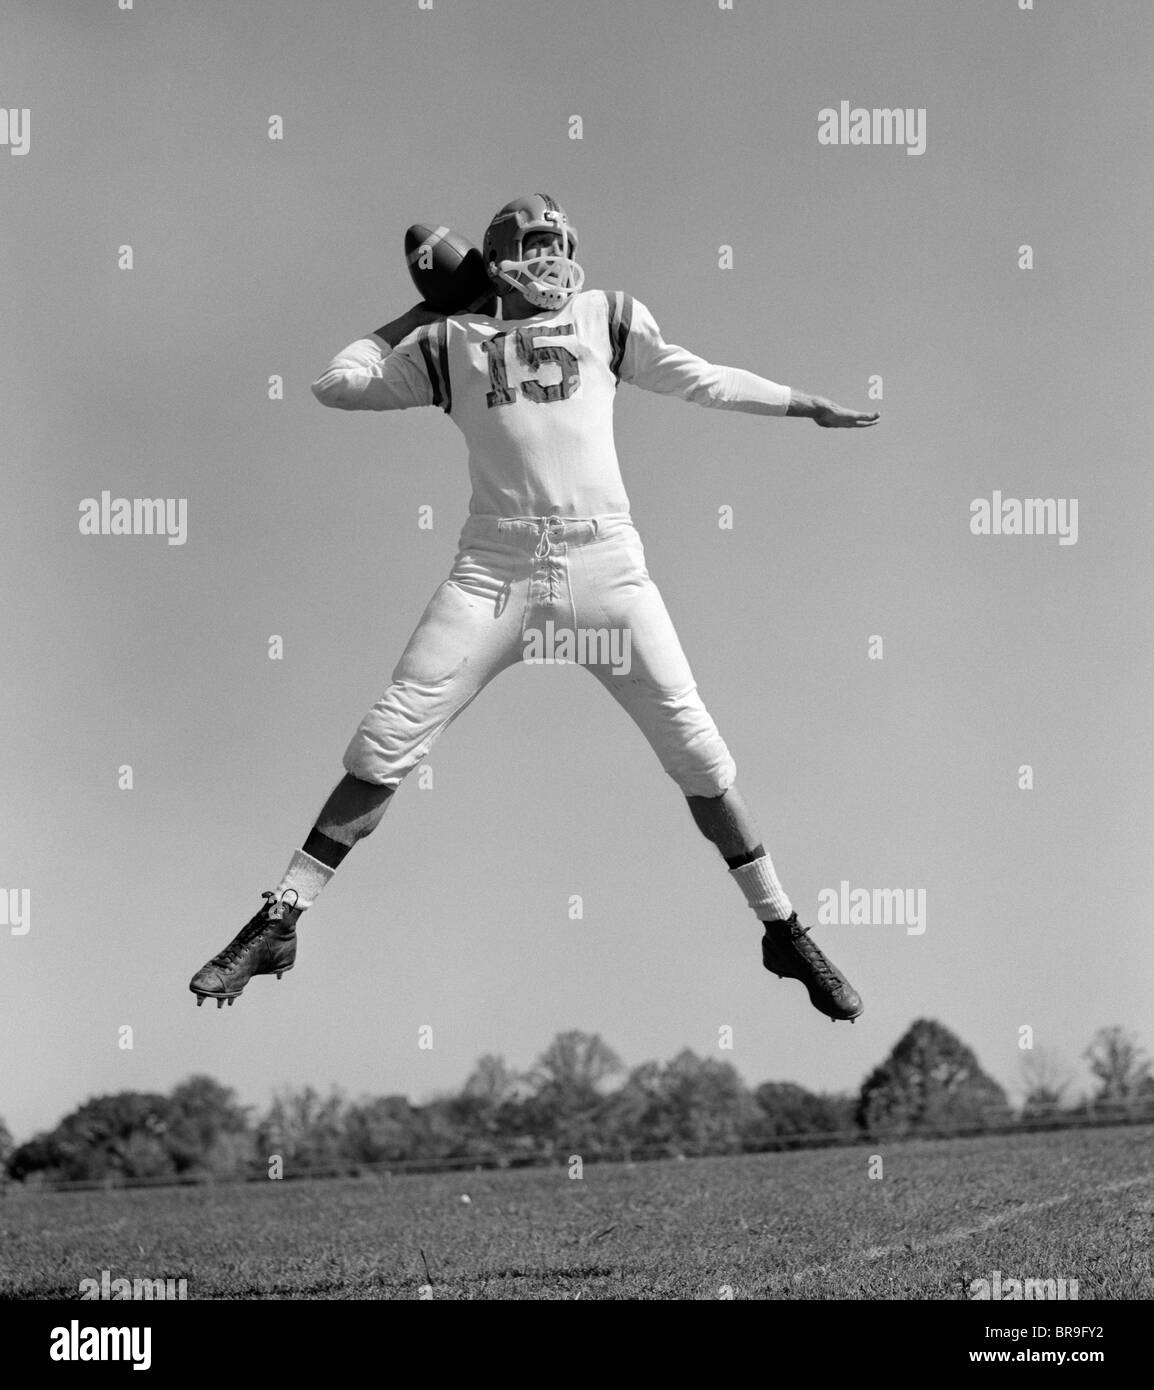 1960s QUARTERBACK JUMPING AND THROWING PASS FOOTBALL Stock Photo